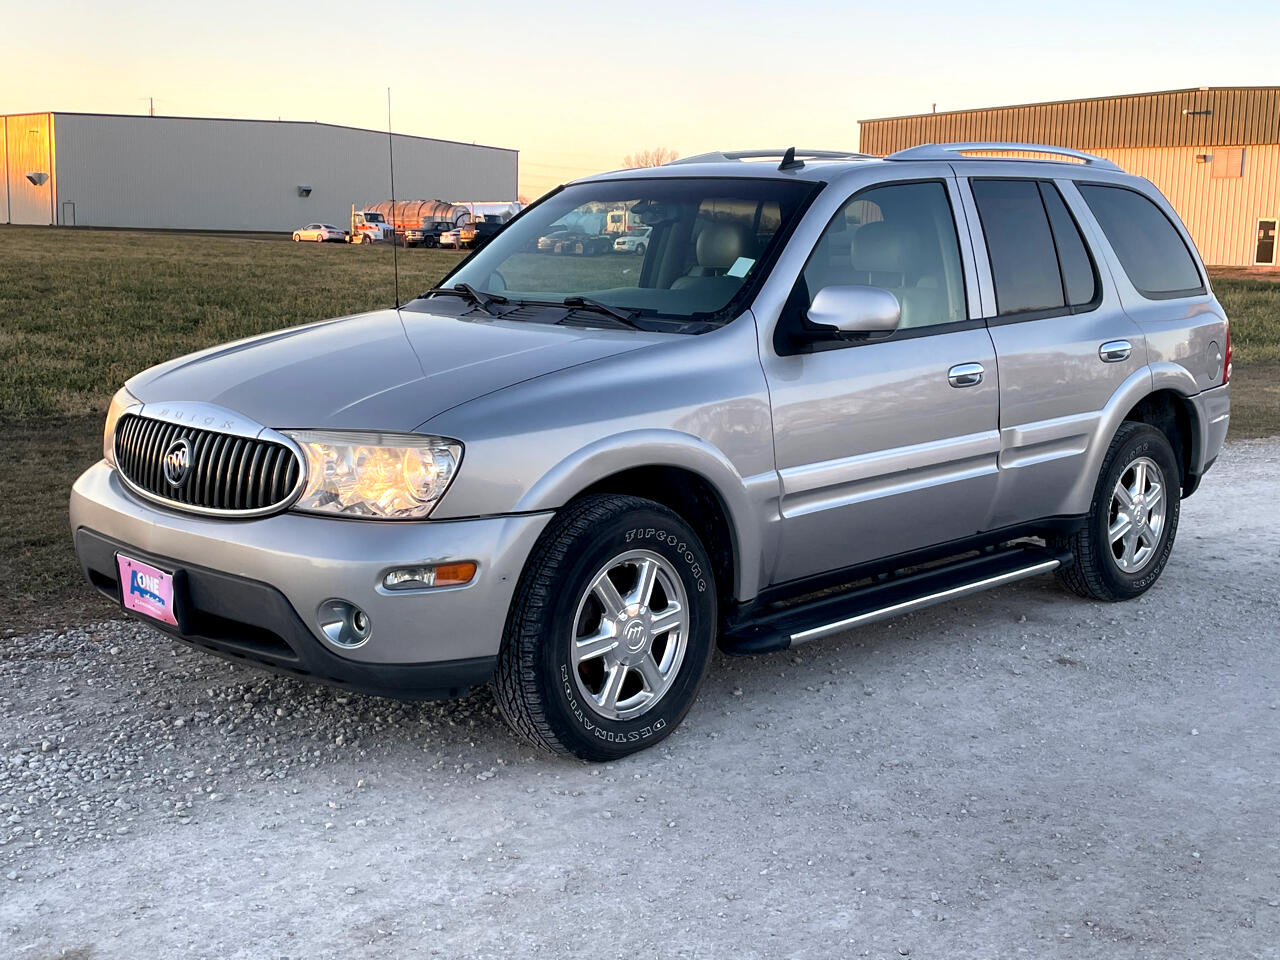 Used 2007 Buick Rainier AWD 4dr CXL for Sale in Council Bluffs IA 51501 A1  Auto Sales